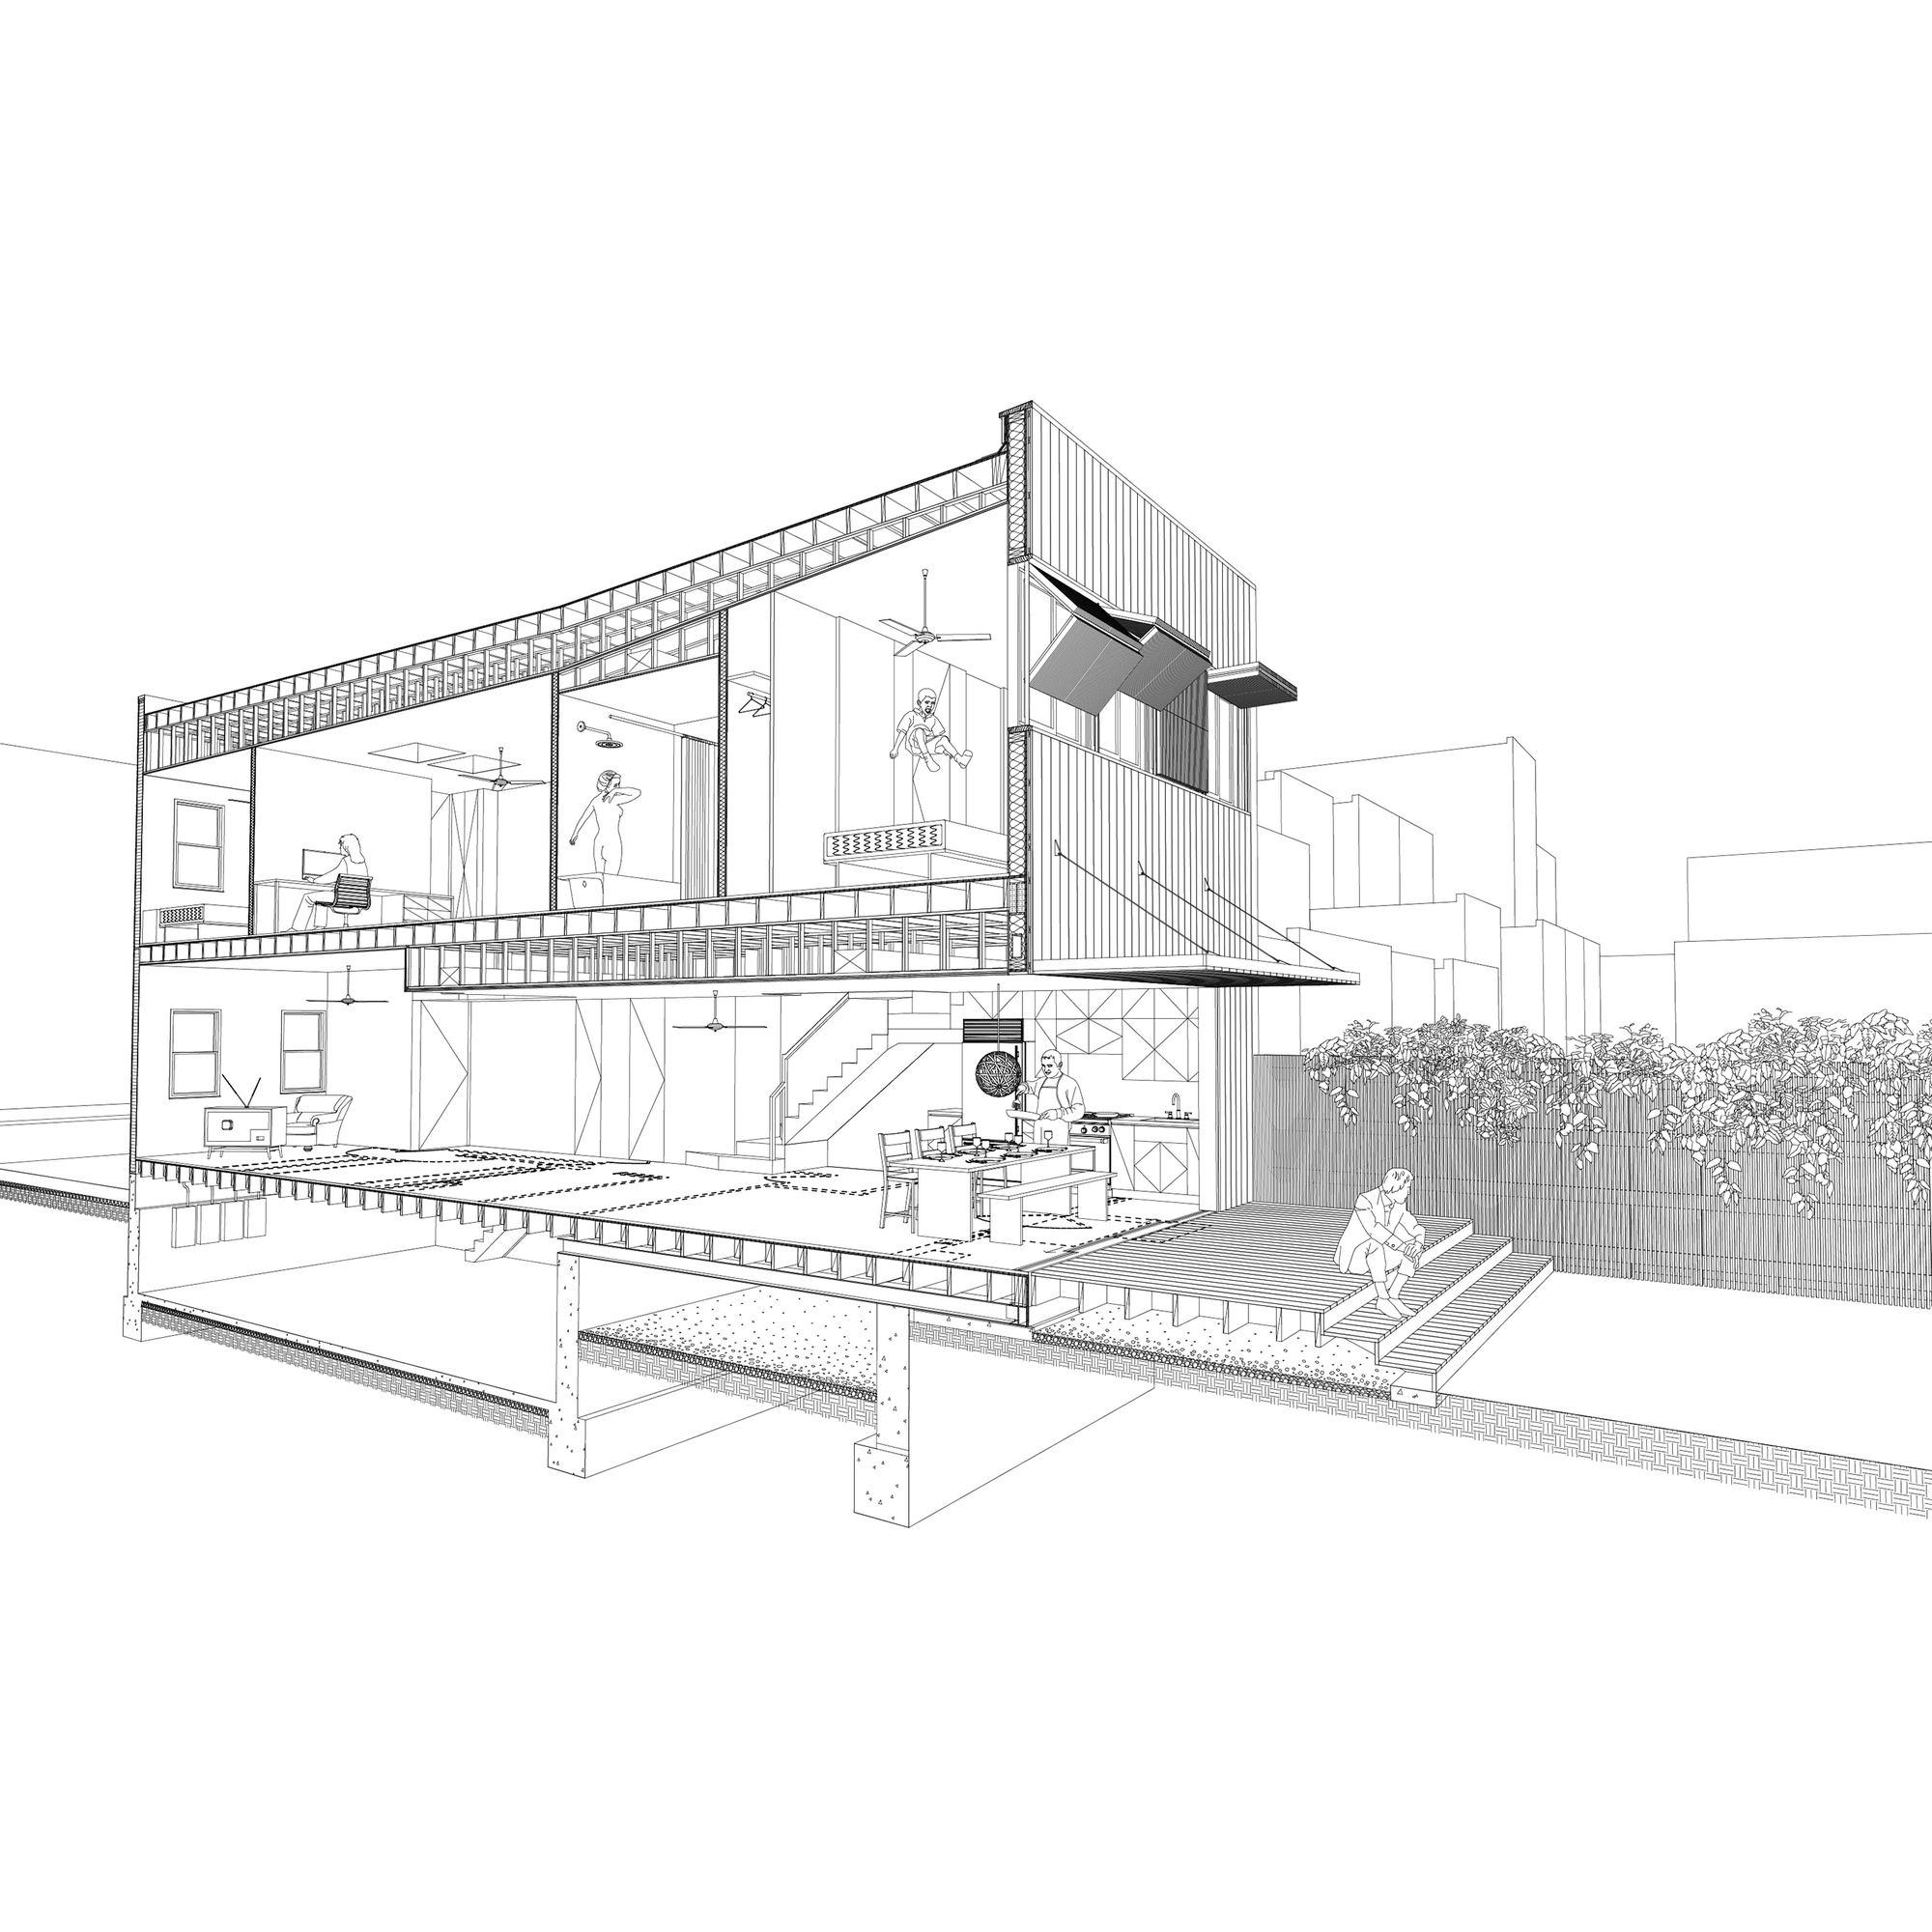 54f797f8e58ecee84d0001c8_brooklyn-row-house-office-of-architecture_section